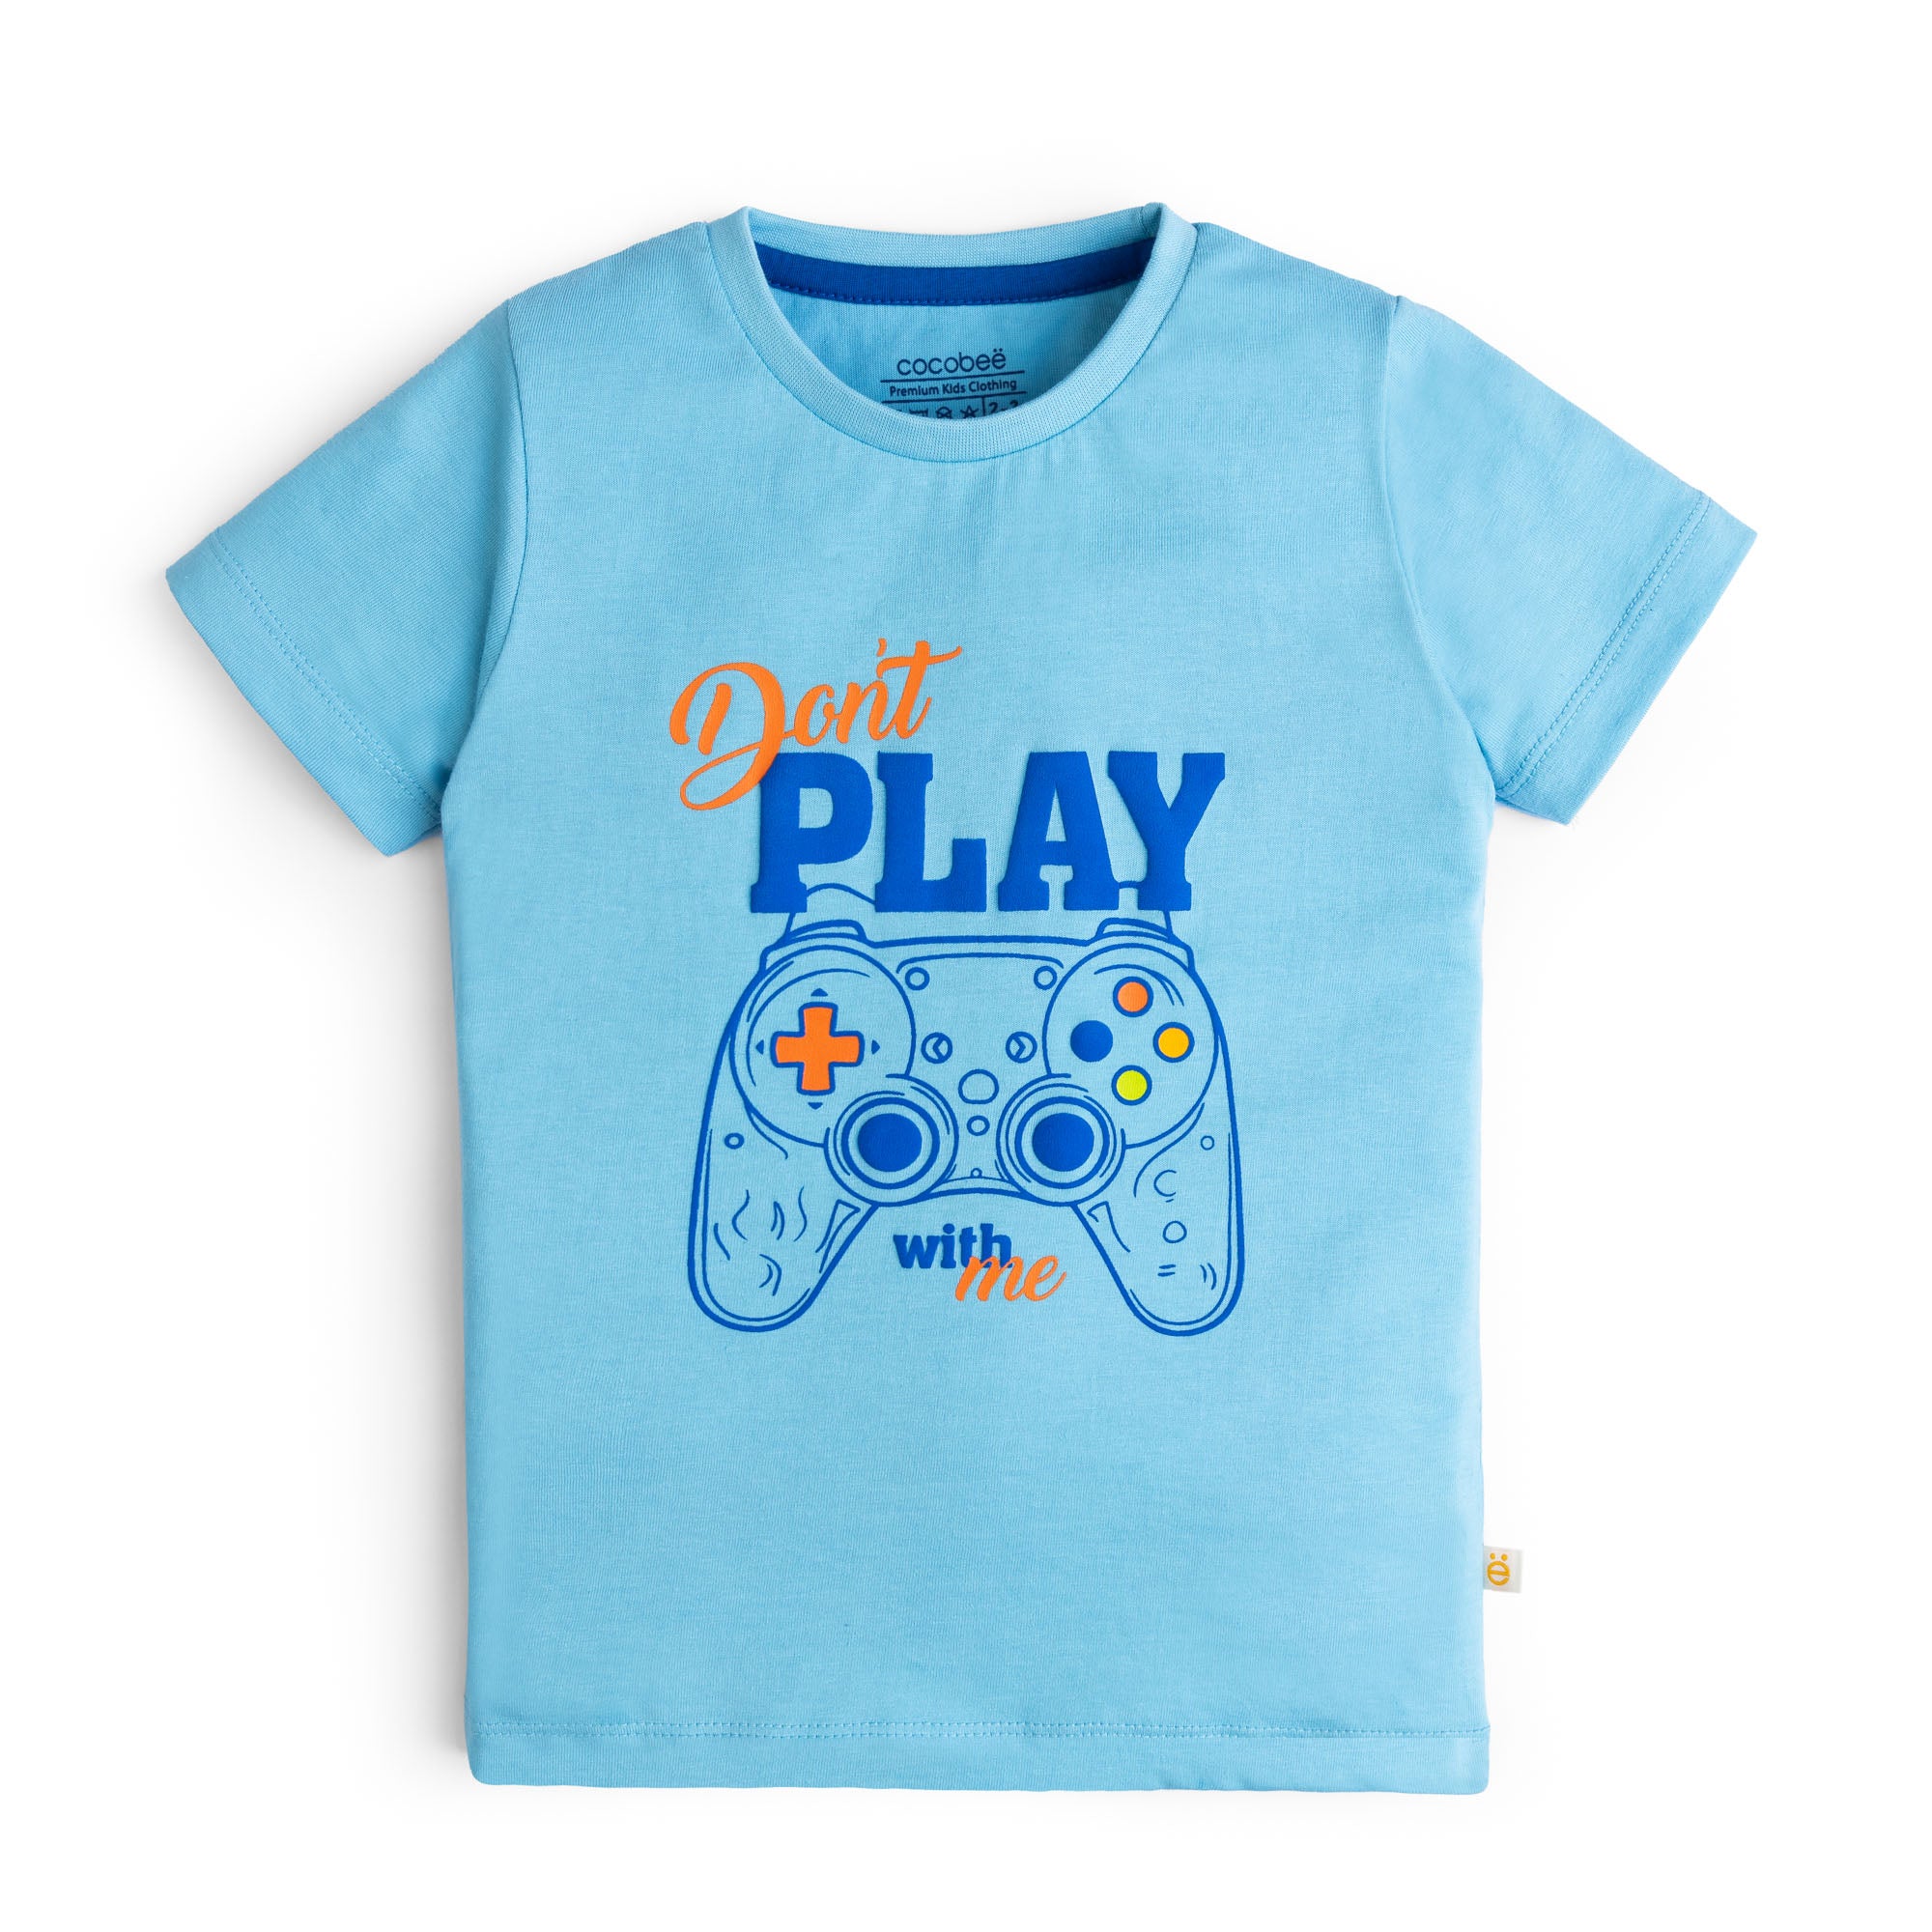 Don't Play With Me Graphic T-Shirt